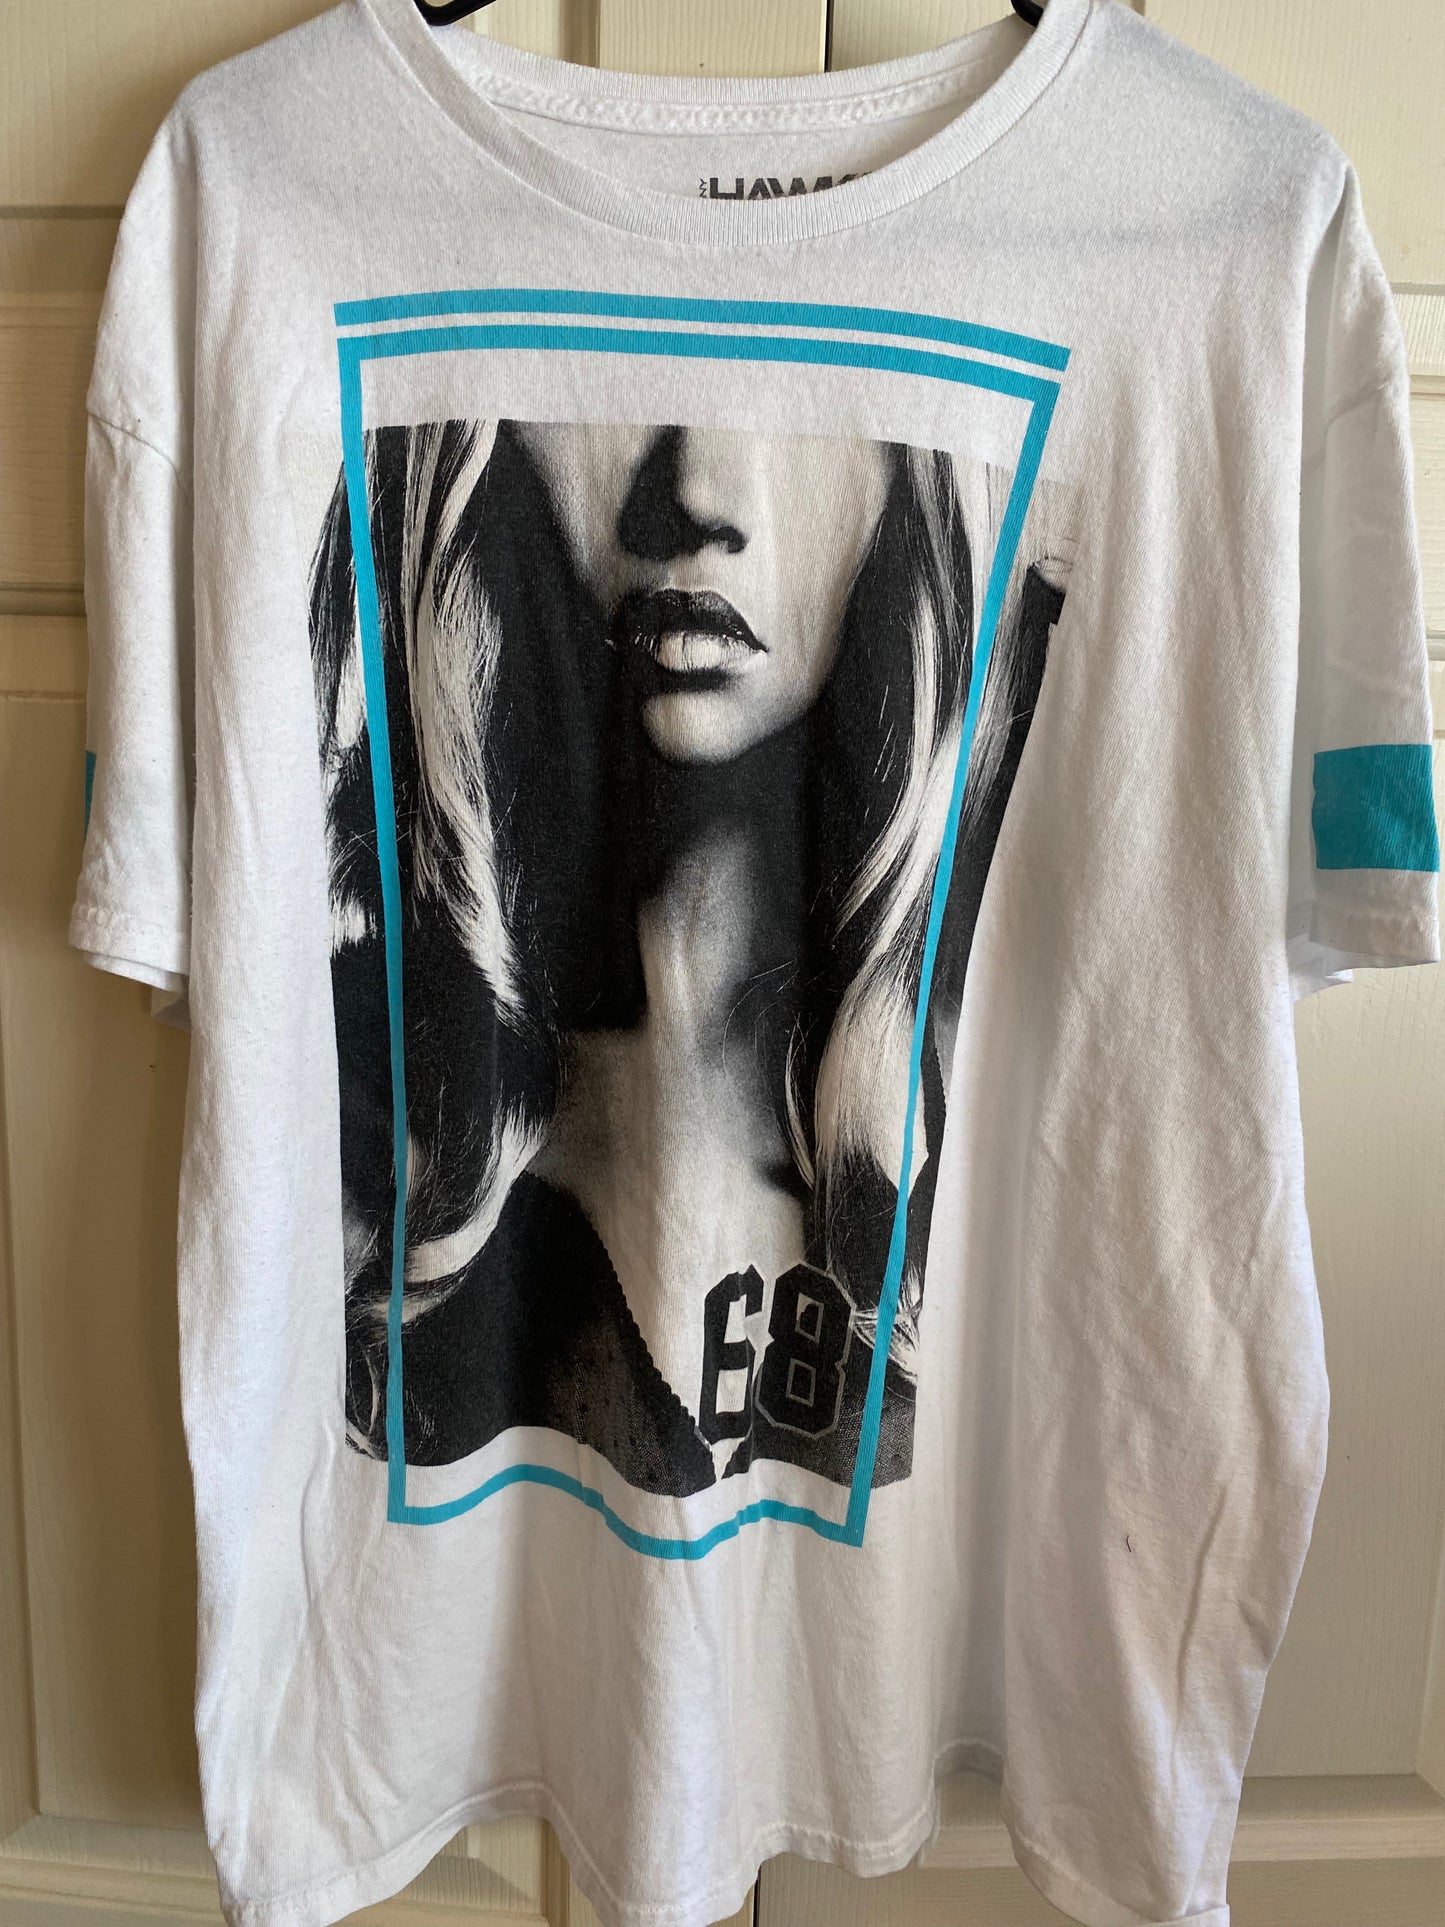 Tony Hawk Graphic White Misfit Tee T Shirt XL Hot Lips Blonde Cleavage #68